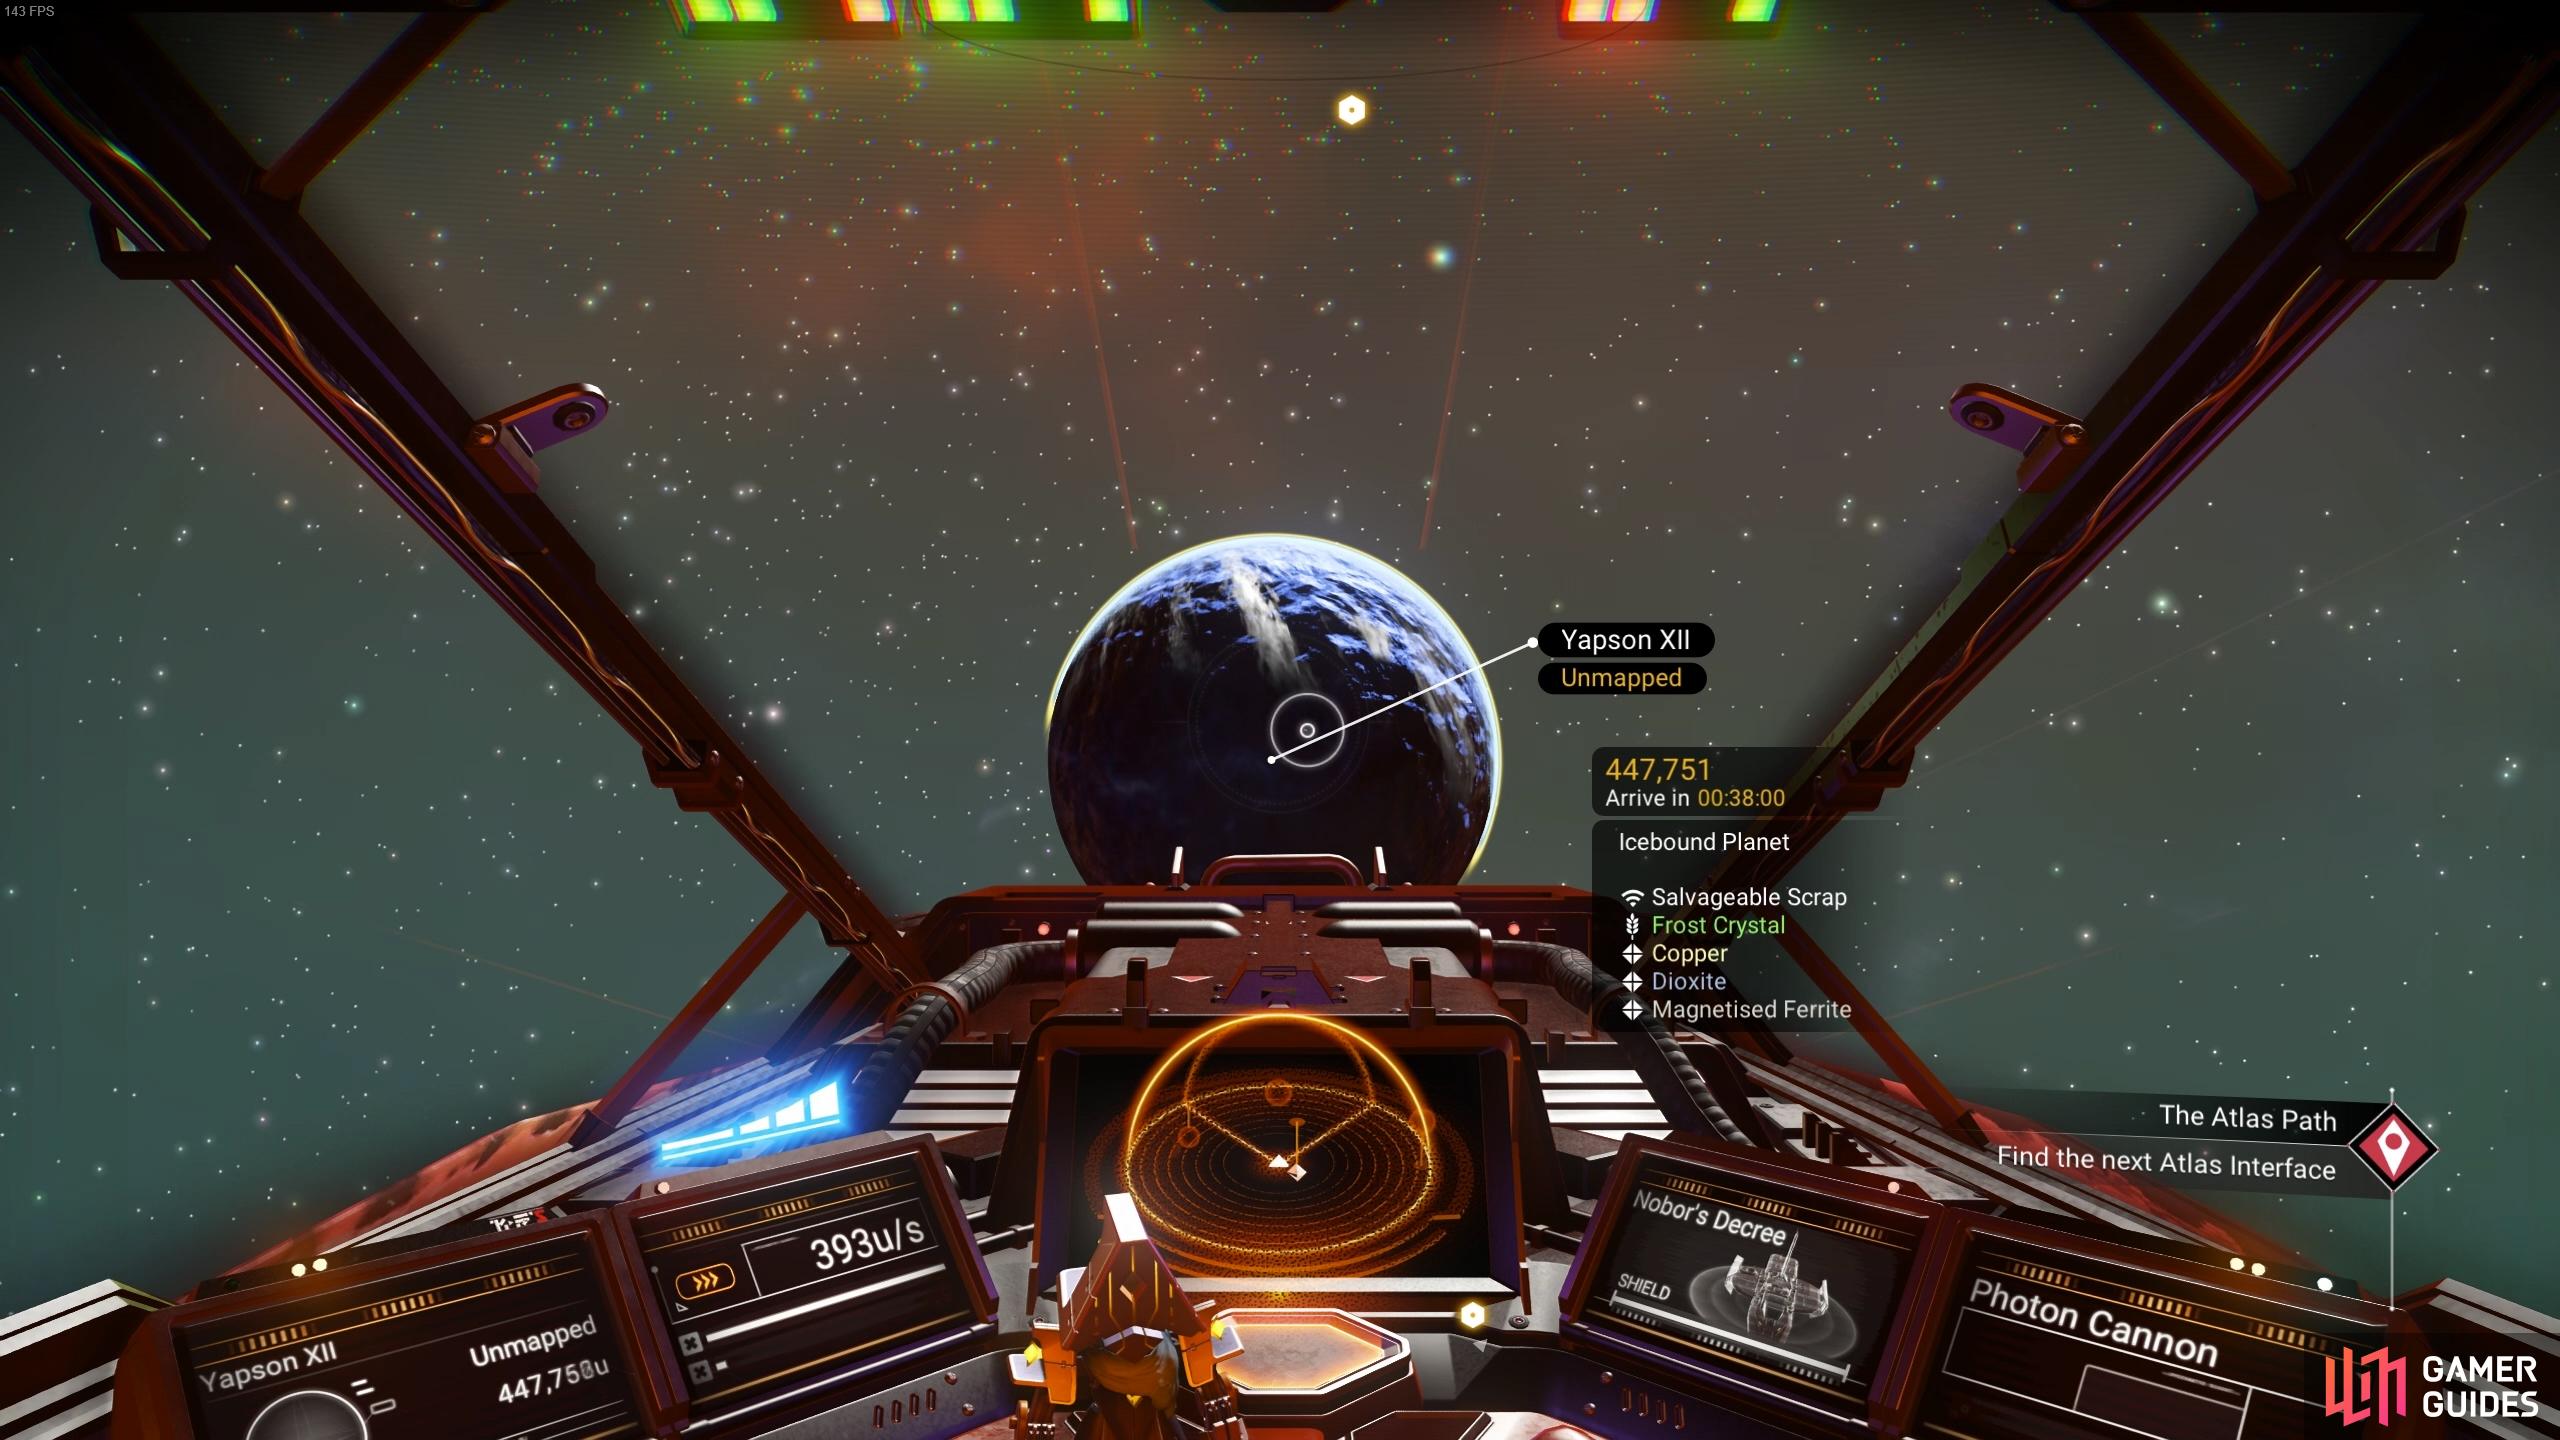 You can scan frozen planets from your starship to check whether they have Dioxite present.